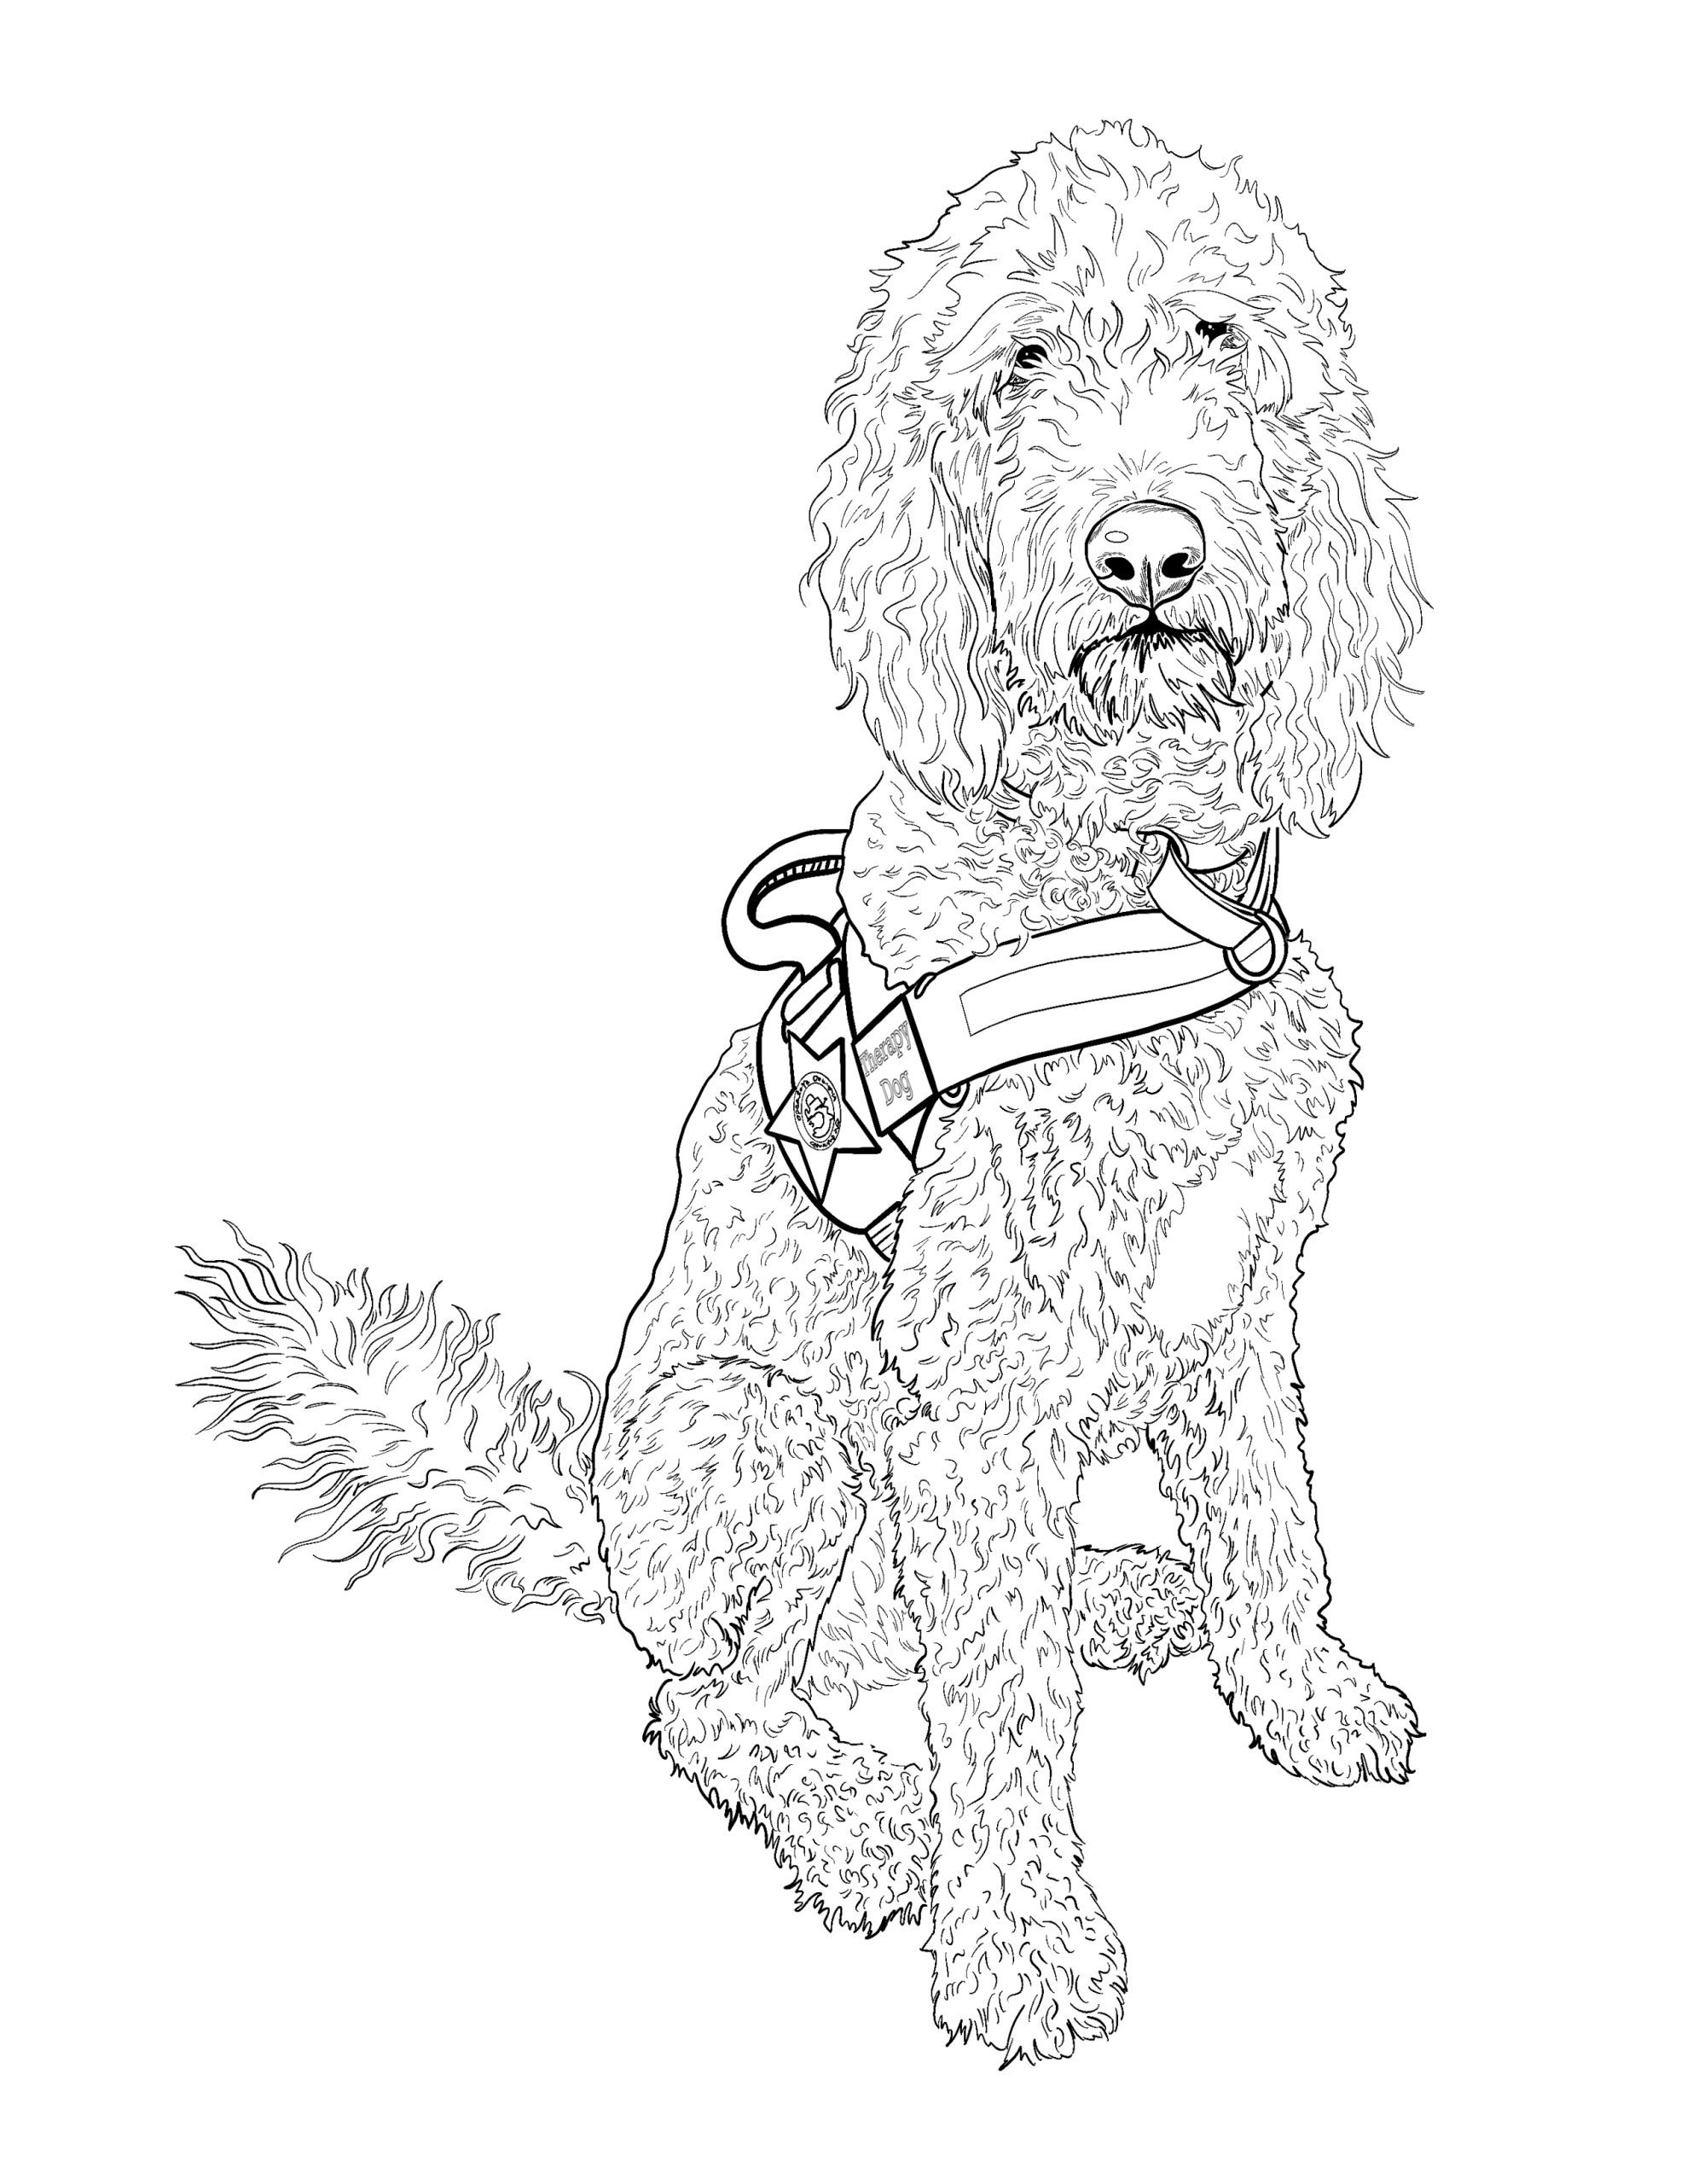 Coloring Pages K9 - Murphy - Osceola County Sheriff's Office - Sheriff